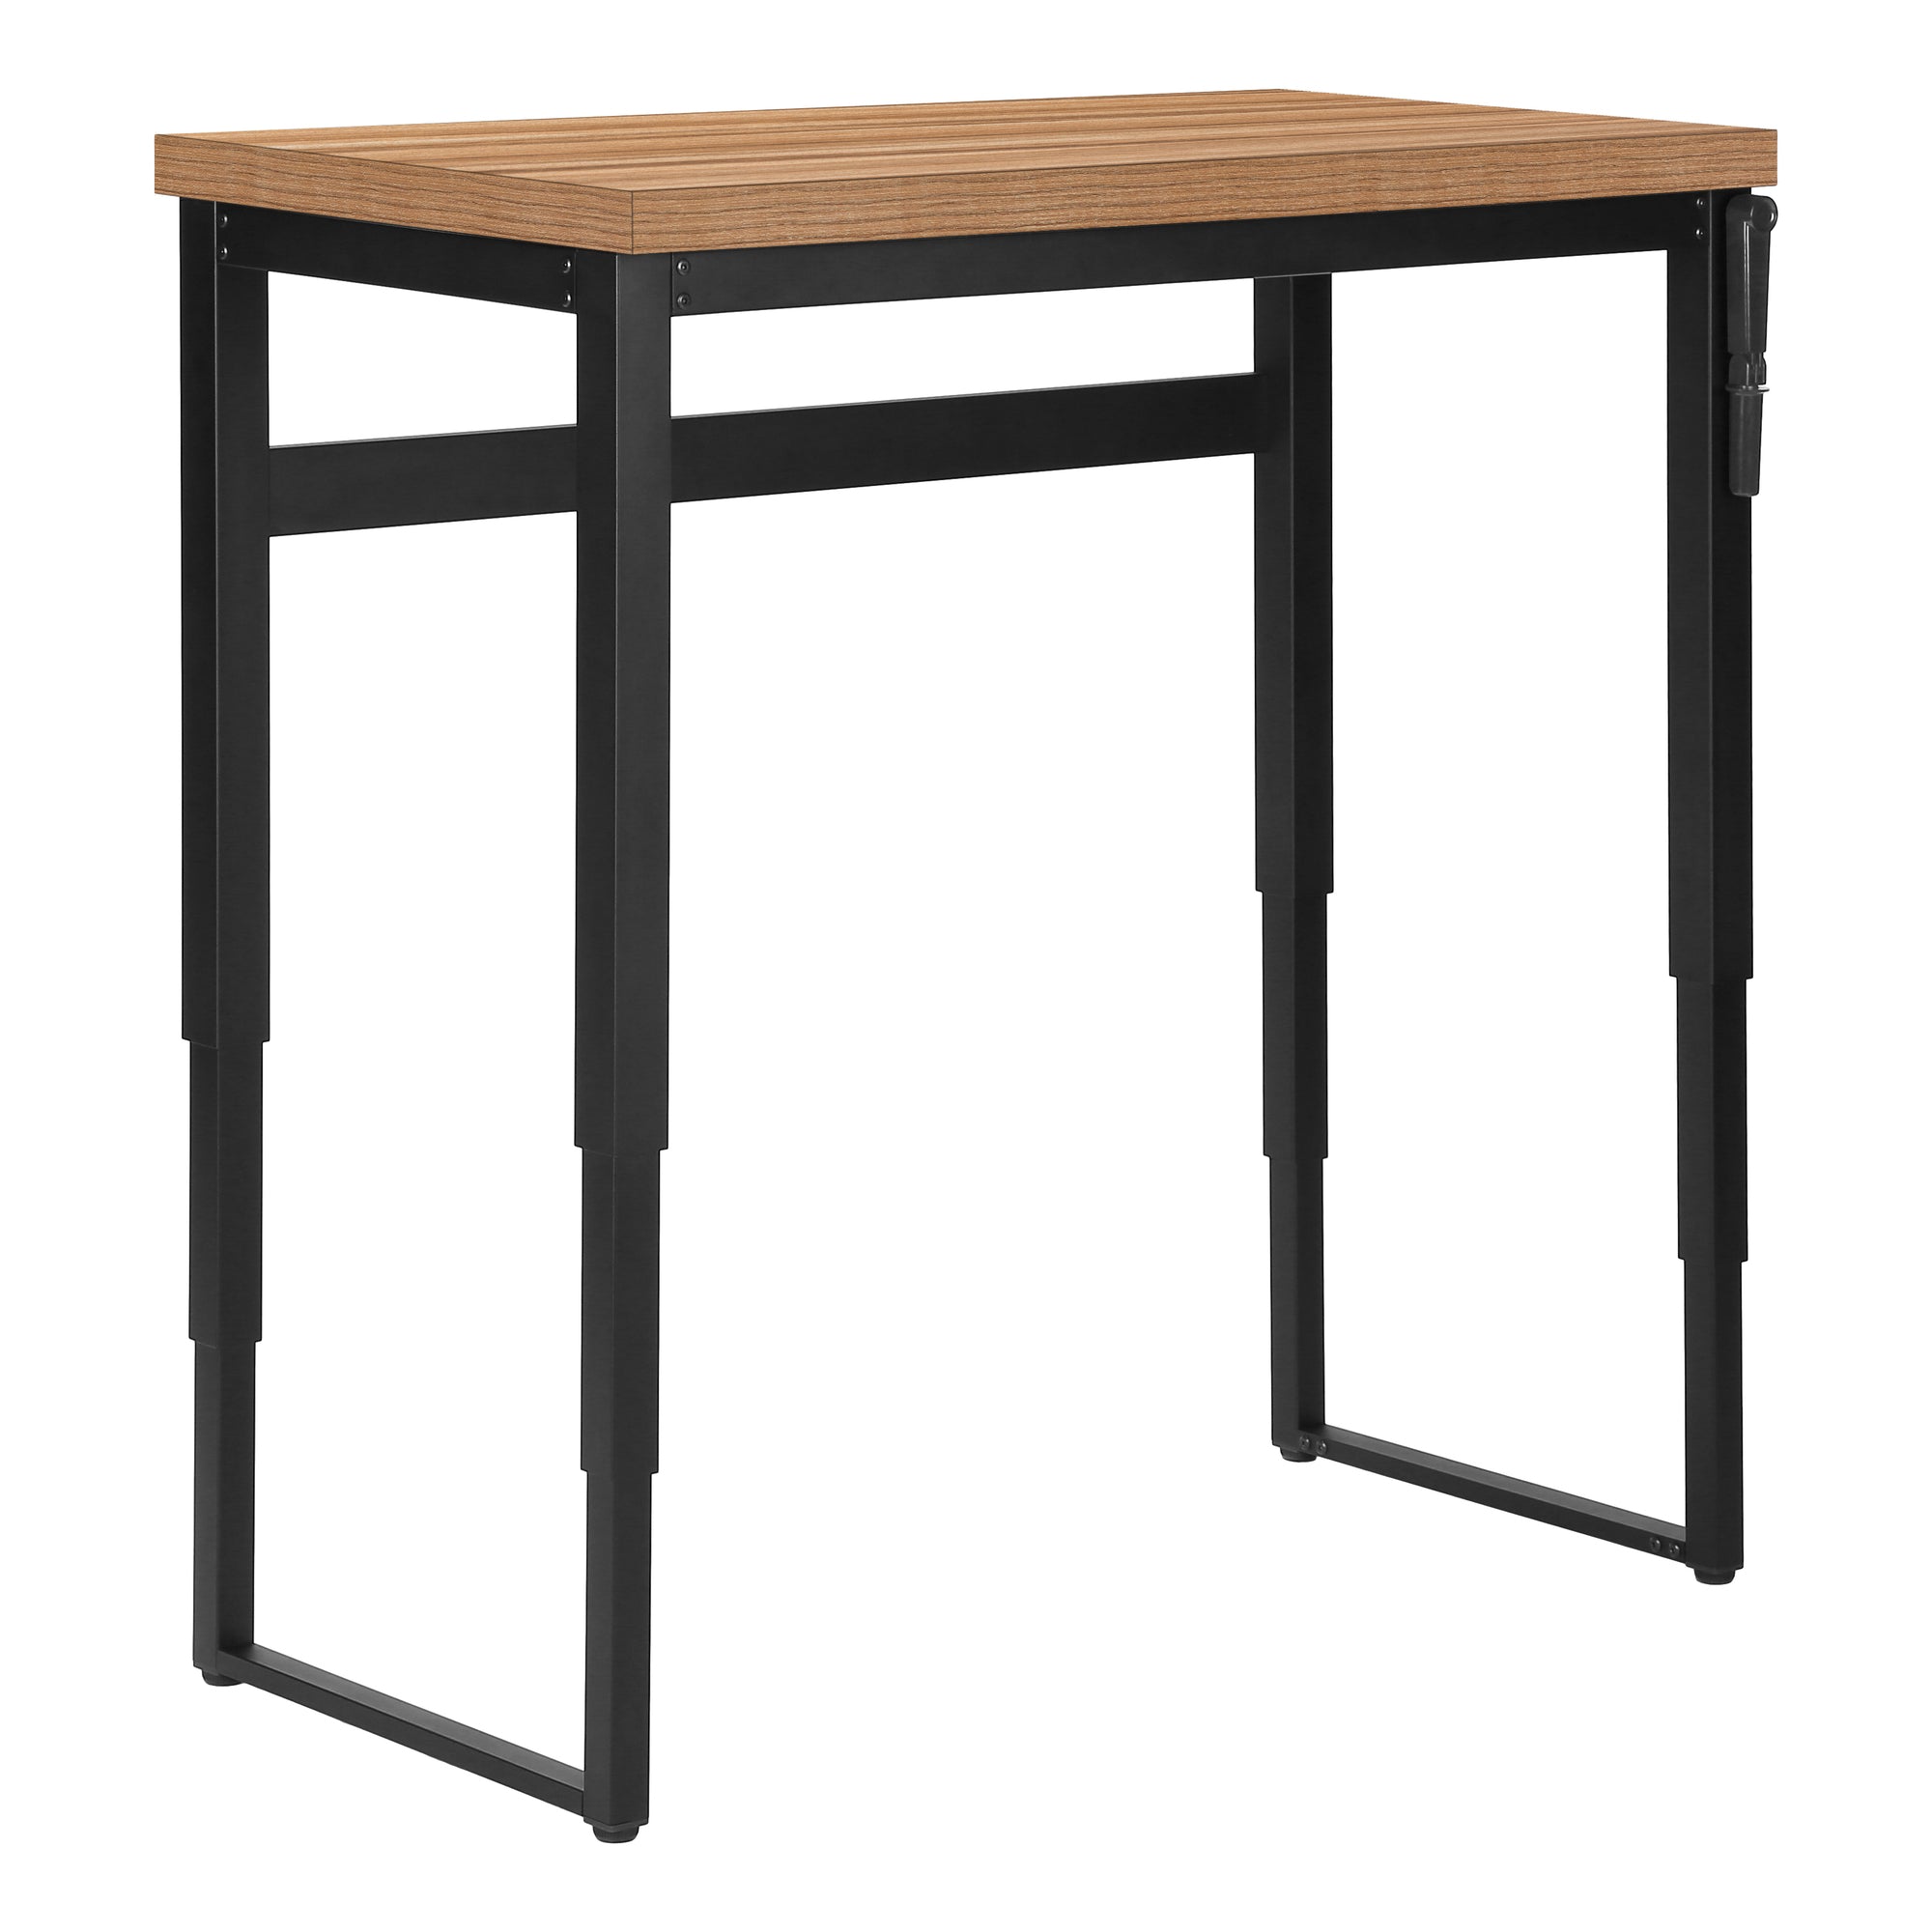 MN-717677    Computer Desk, Home Office, Standing, Adjustable, 48"L, Metal Legs, Laminate, Reclaimed Wood, Contemporary, Modern